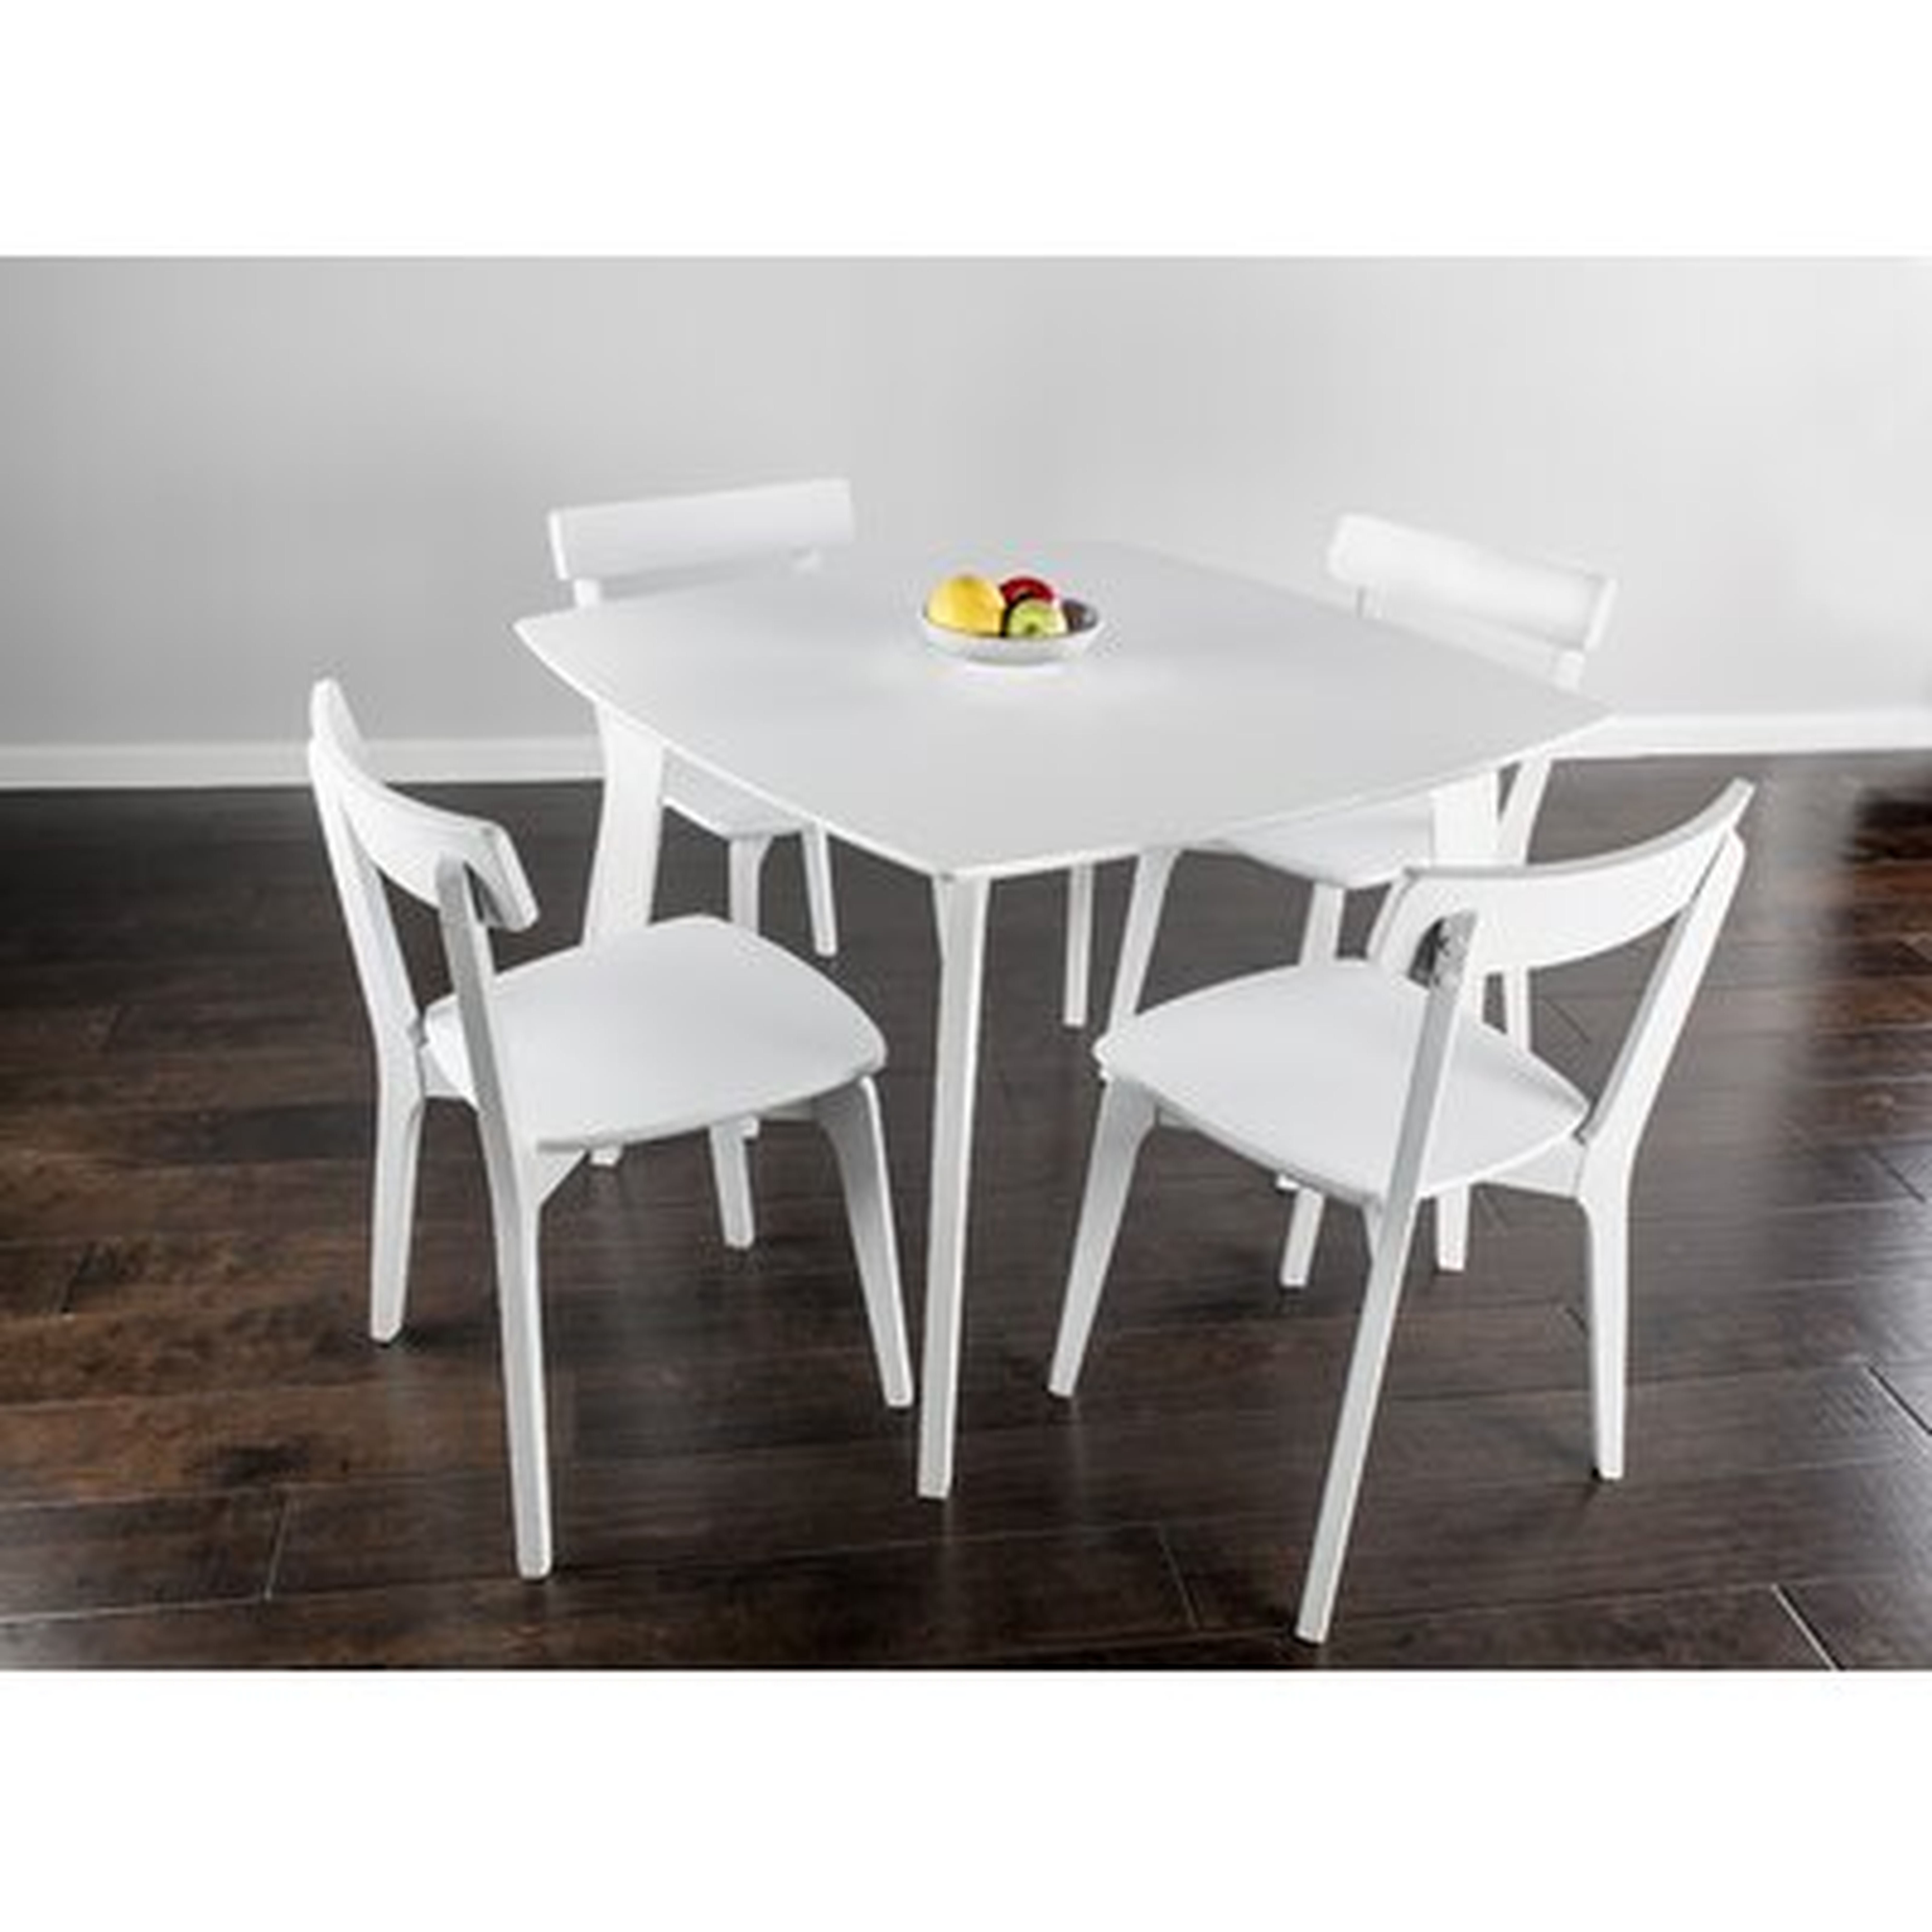 Otwin 5 Piece White Dining Table With Square Table And 4 White Chairs - Wayfair